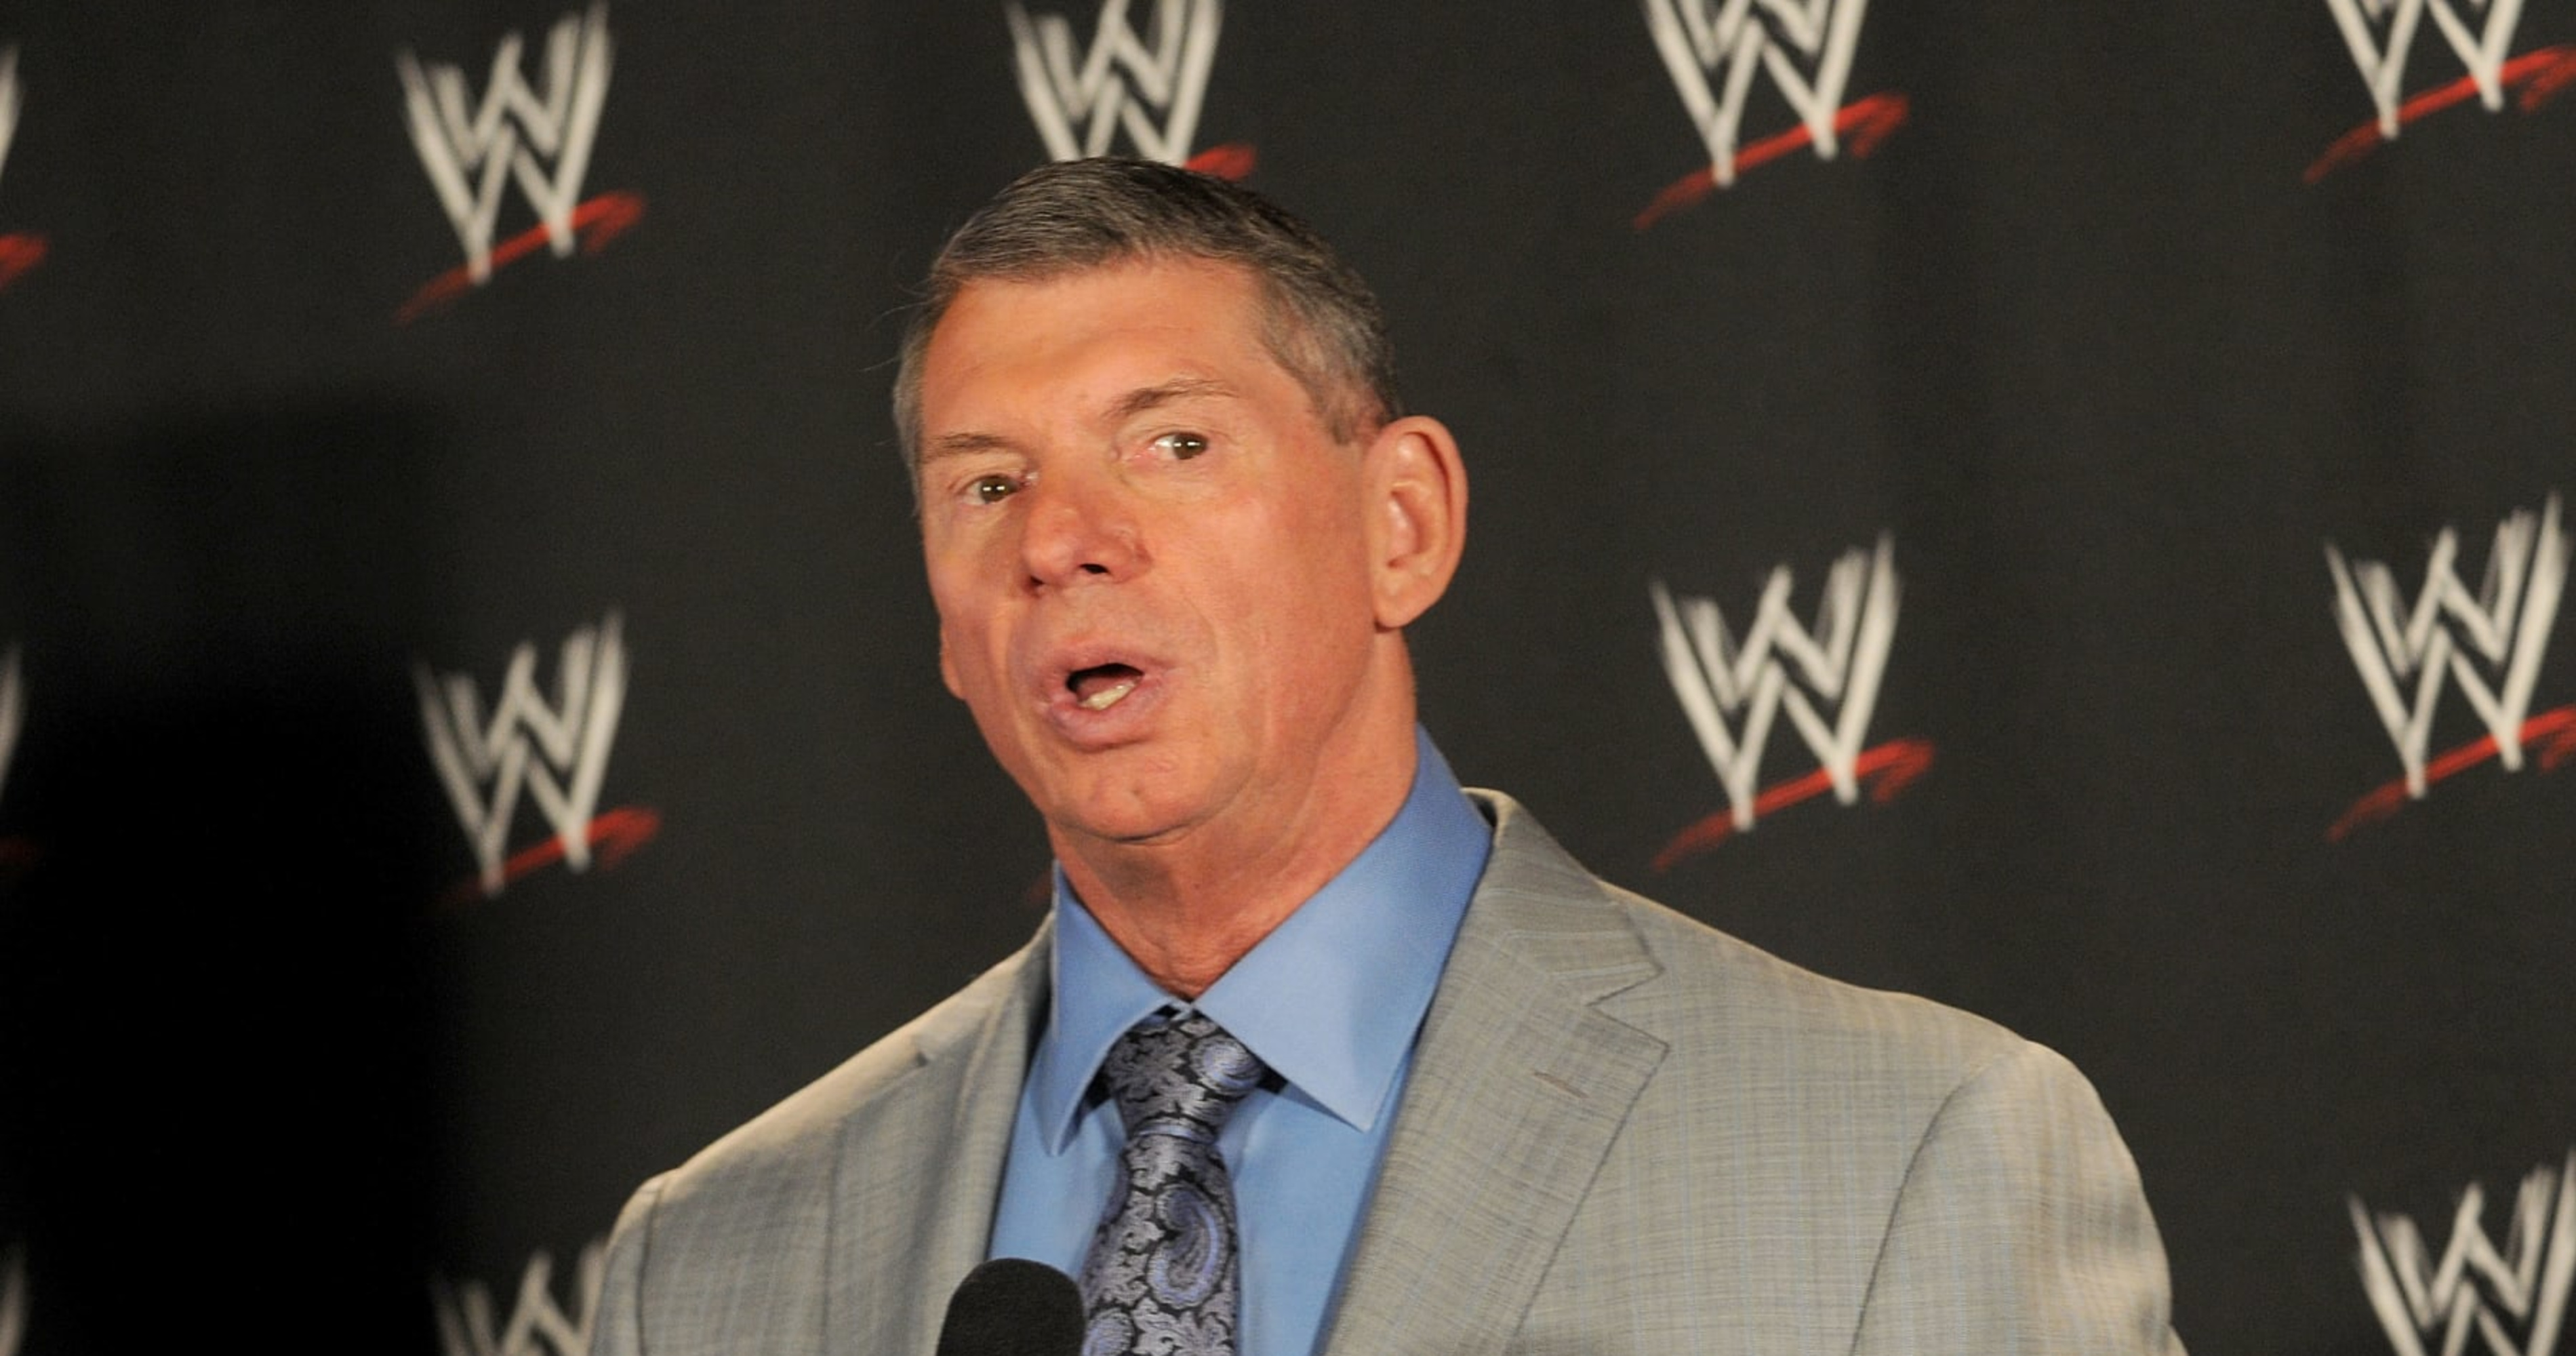 WWE Rumors Potential Sale Not Expected Until Middle of 2023 After